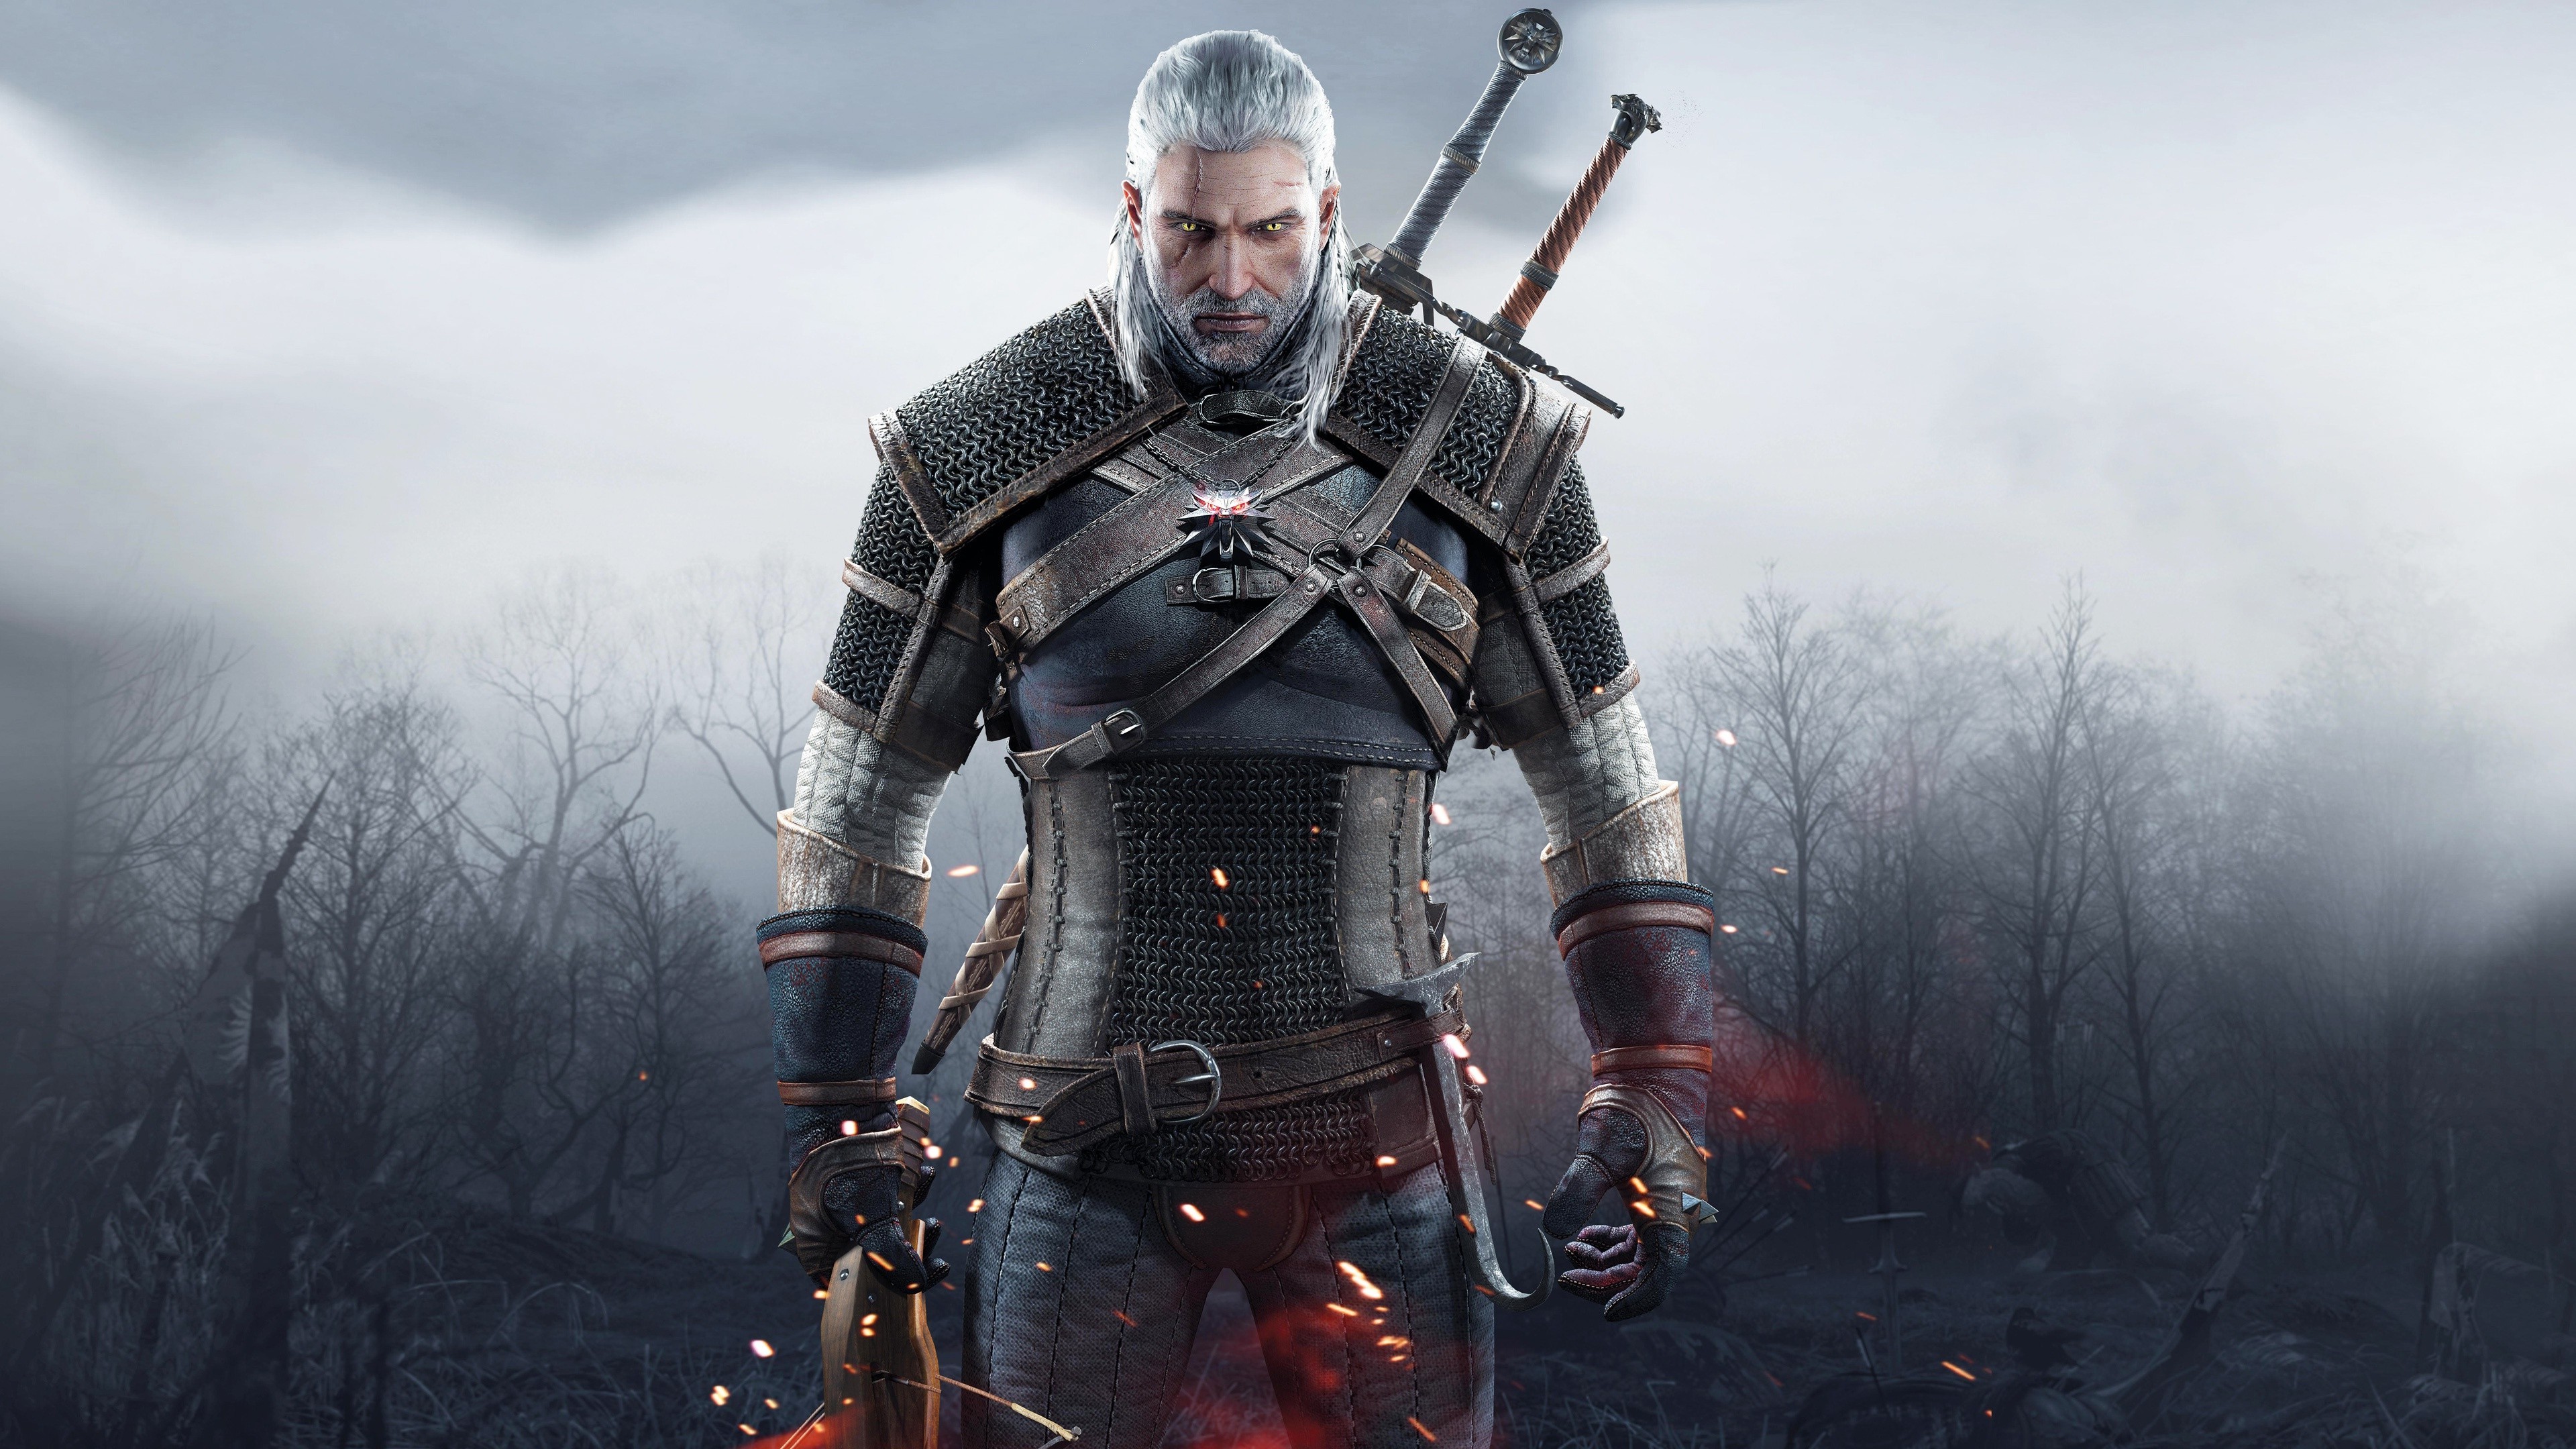 The Witcher 3: Wild Hunt, Geralt Of Rivia, Sword, The Witcher ...
